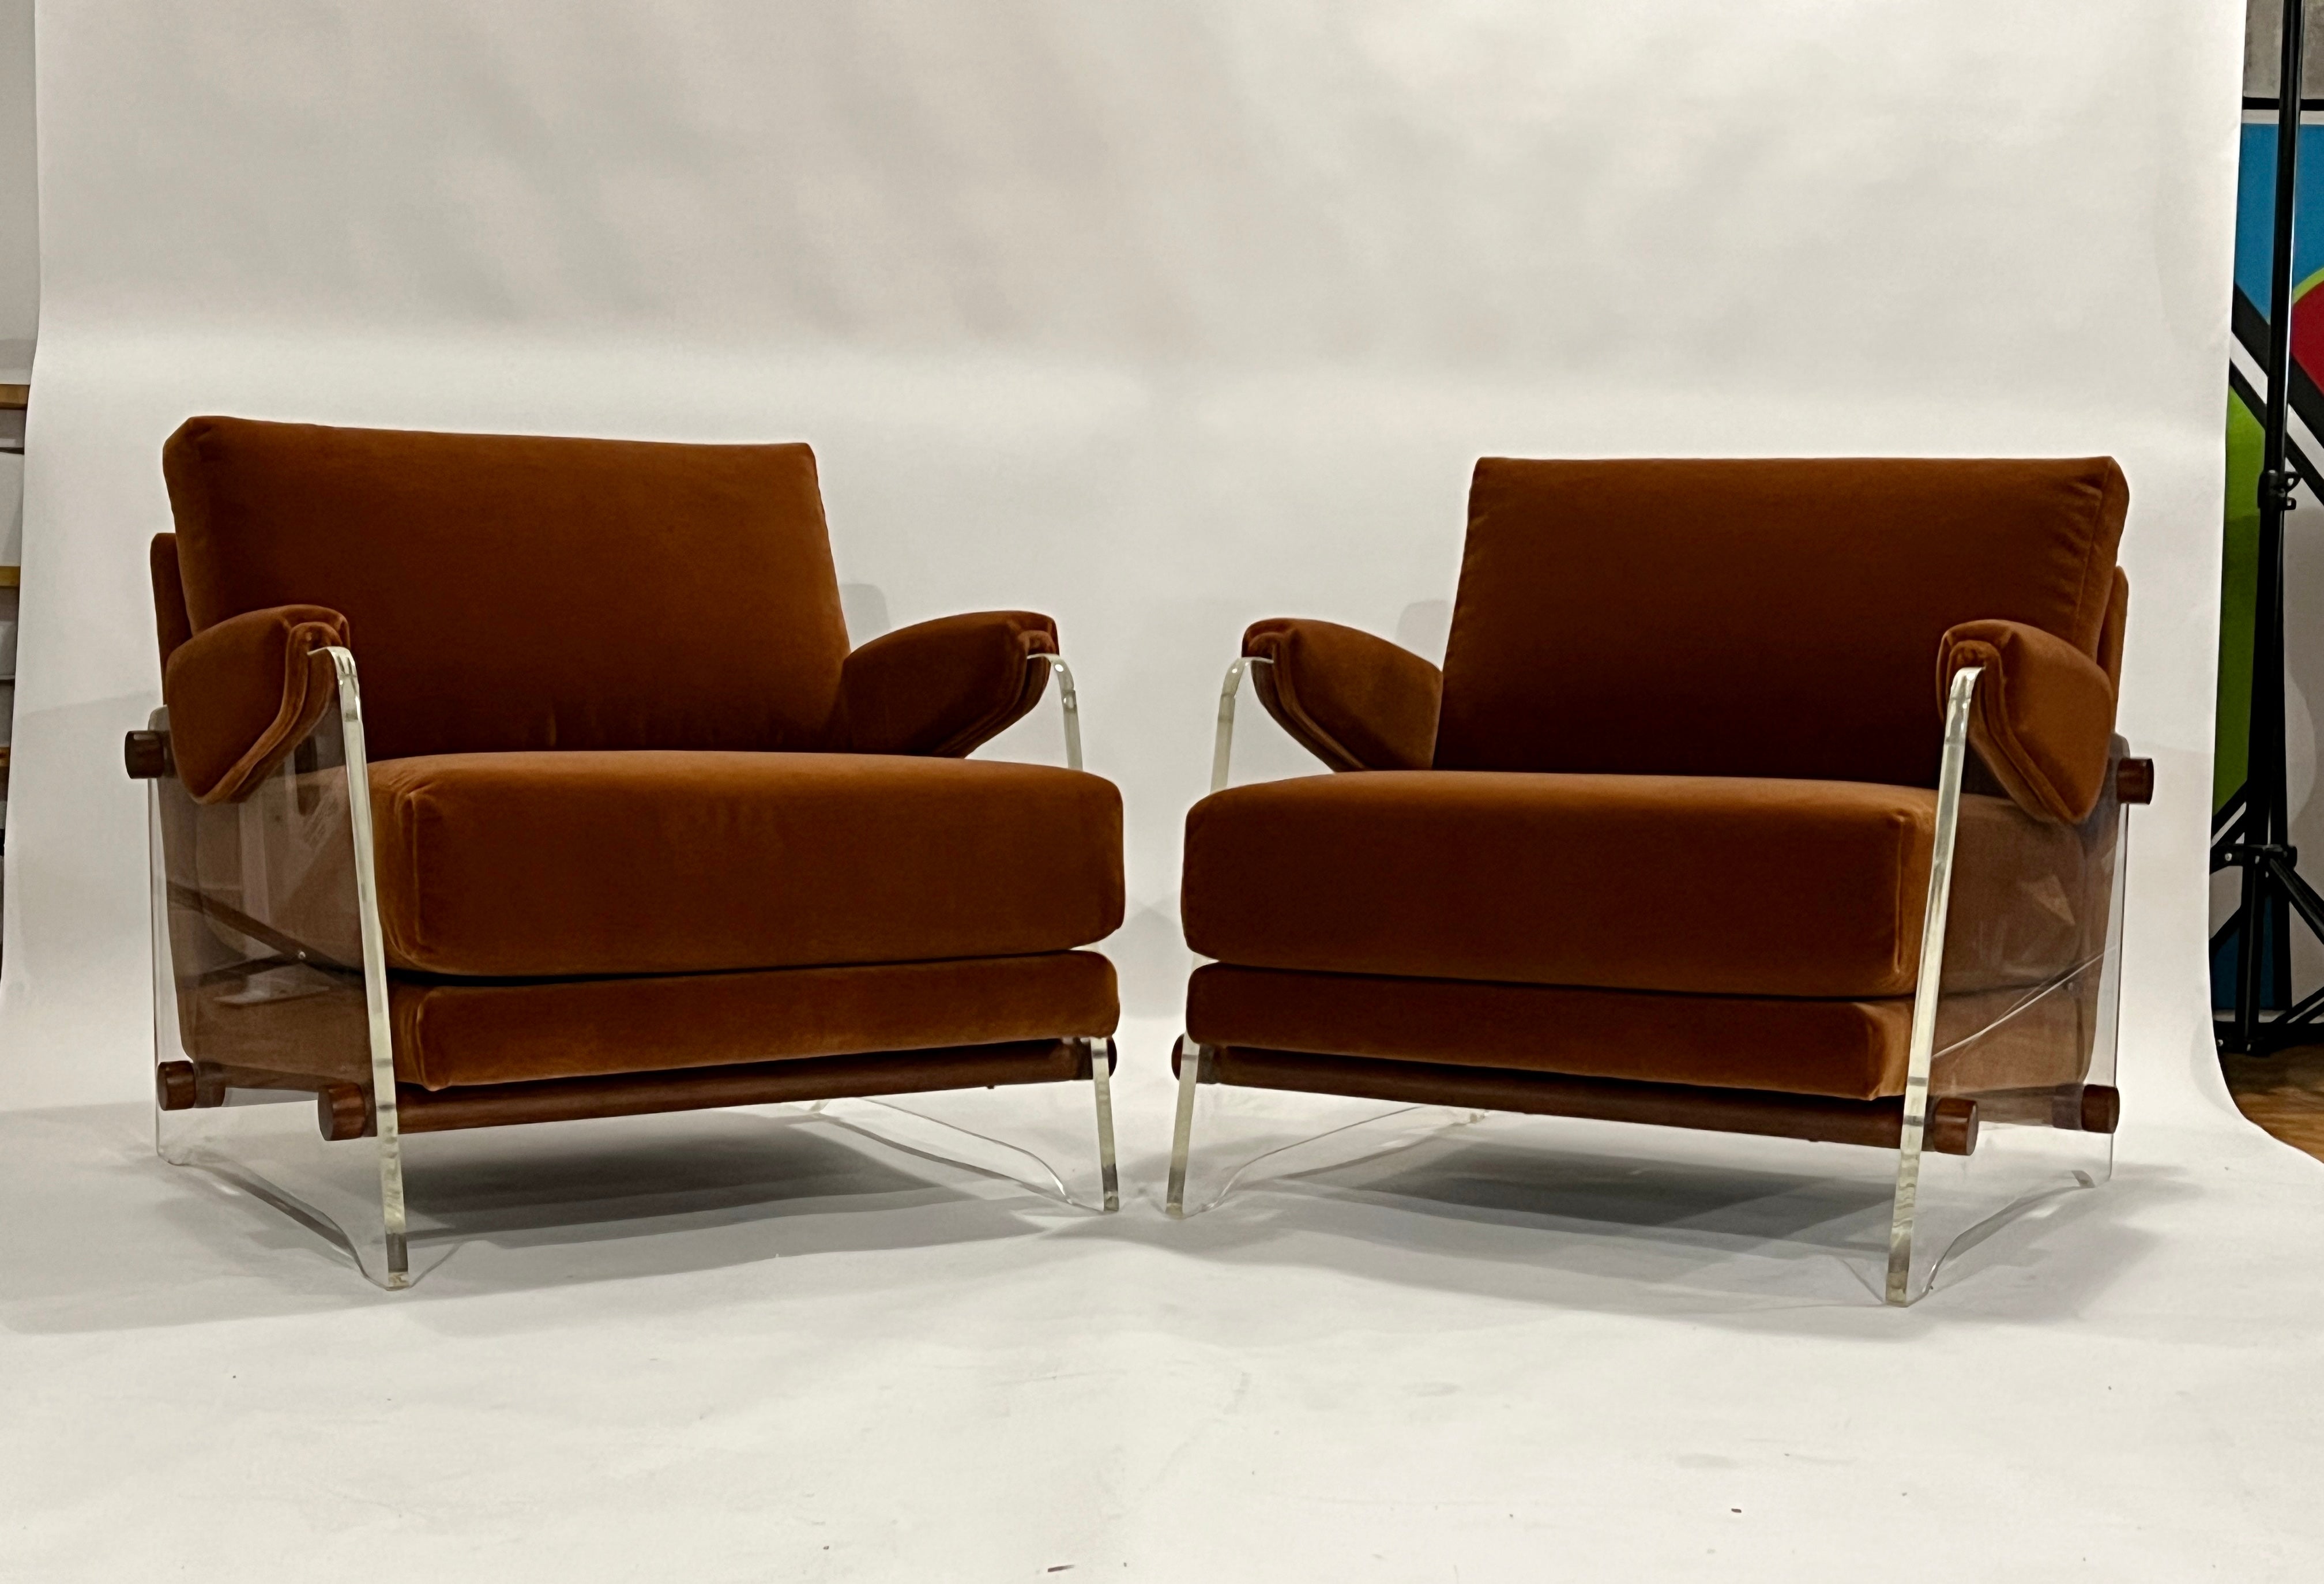 Pair of vintage lucite lounge chairs fully reupholstered in a rust color mohair and refinished walnut wood rod supports. These magnificent and rare chairs are in the style of Milo Baughman, Vladimir Kagan and Pace collection. They are also very